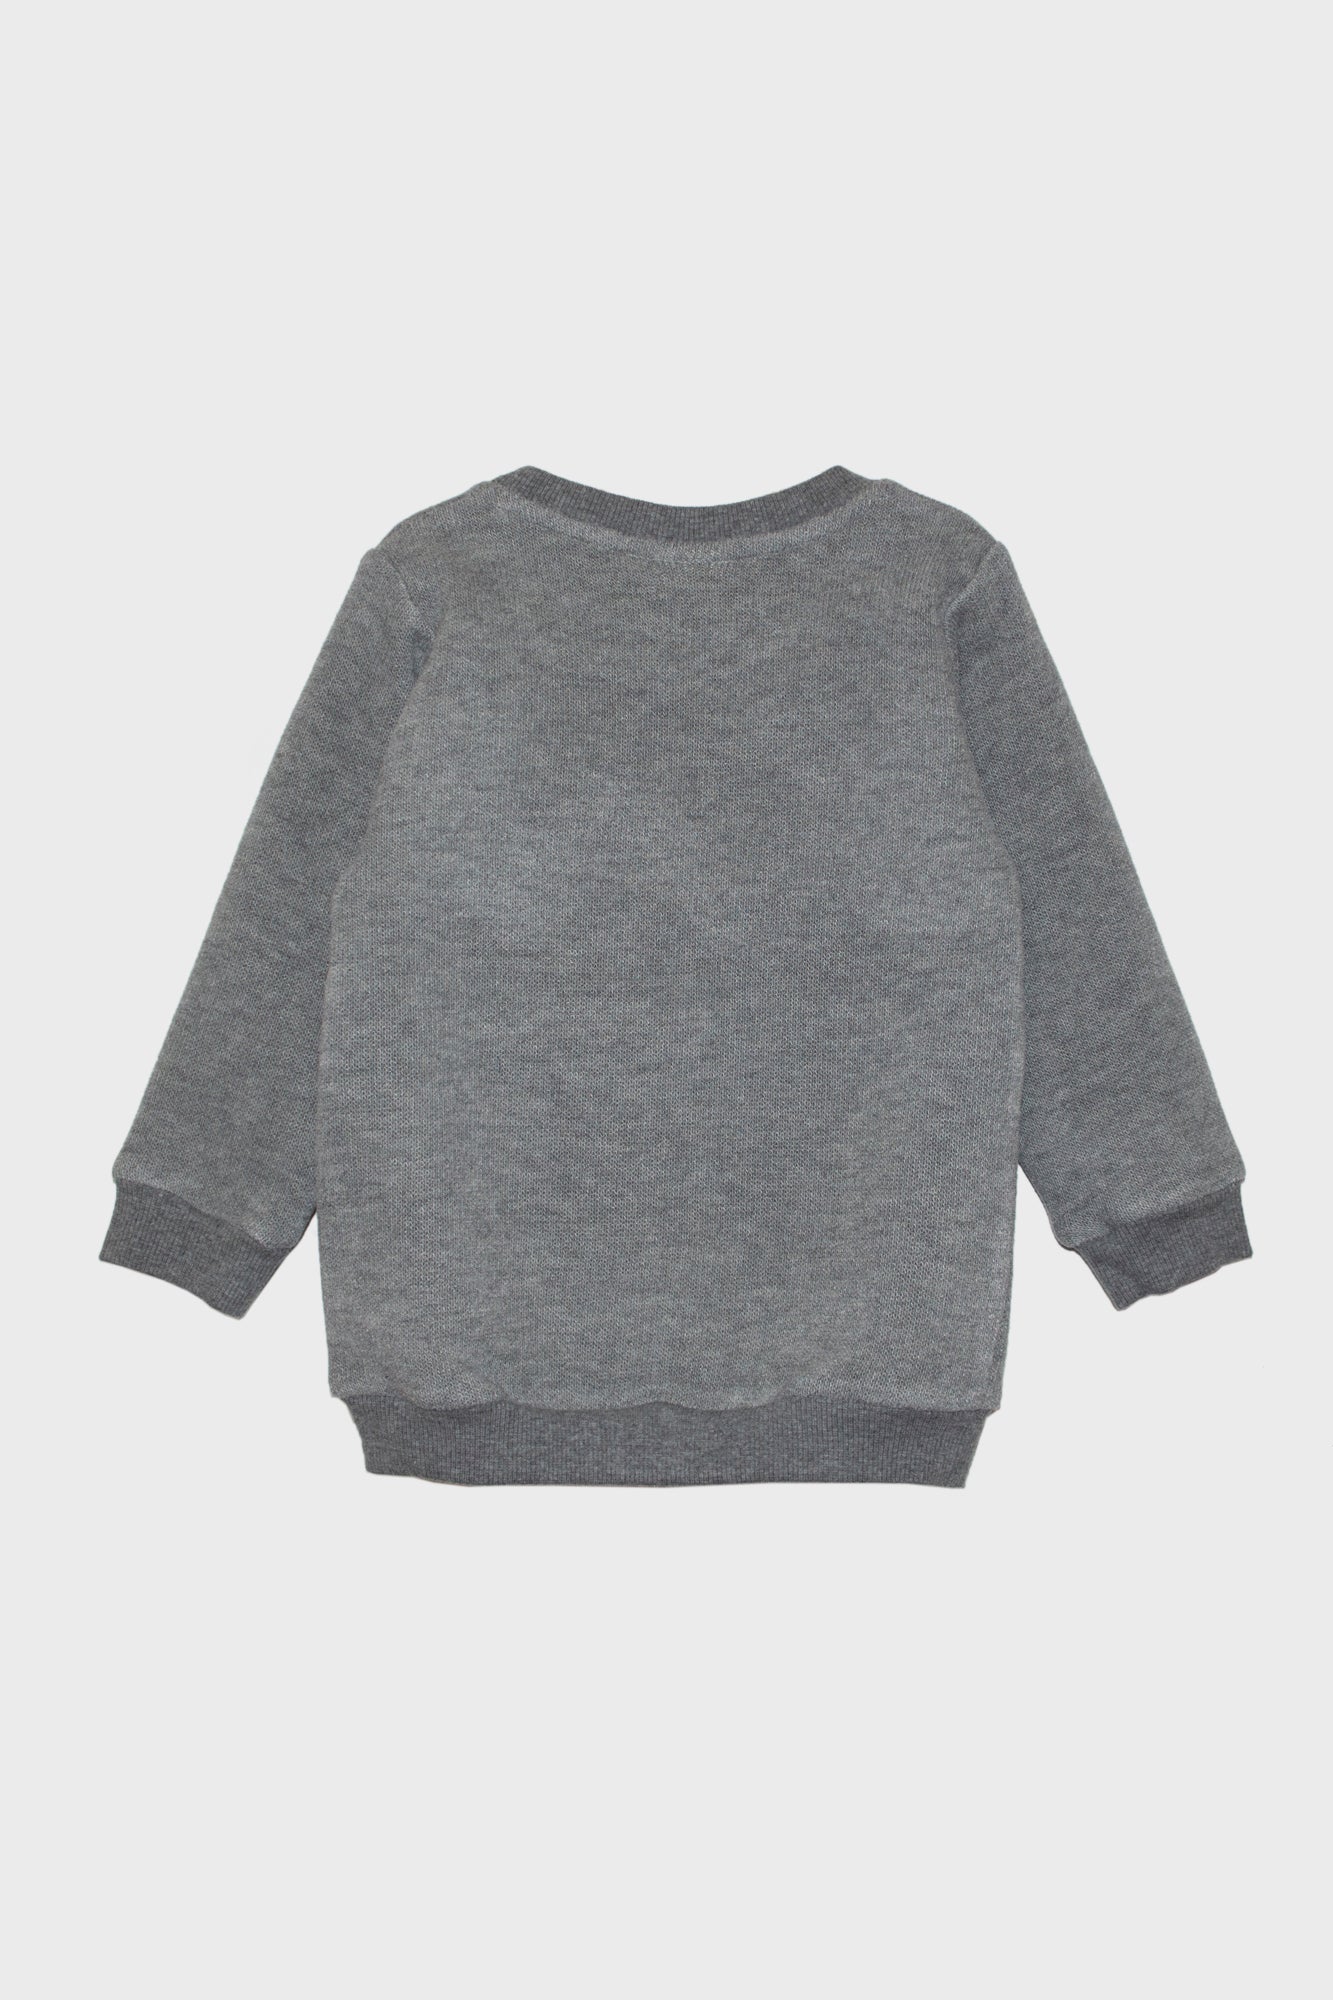 Kid’s One Wolf knitted sweater, grey/white logo